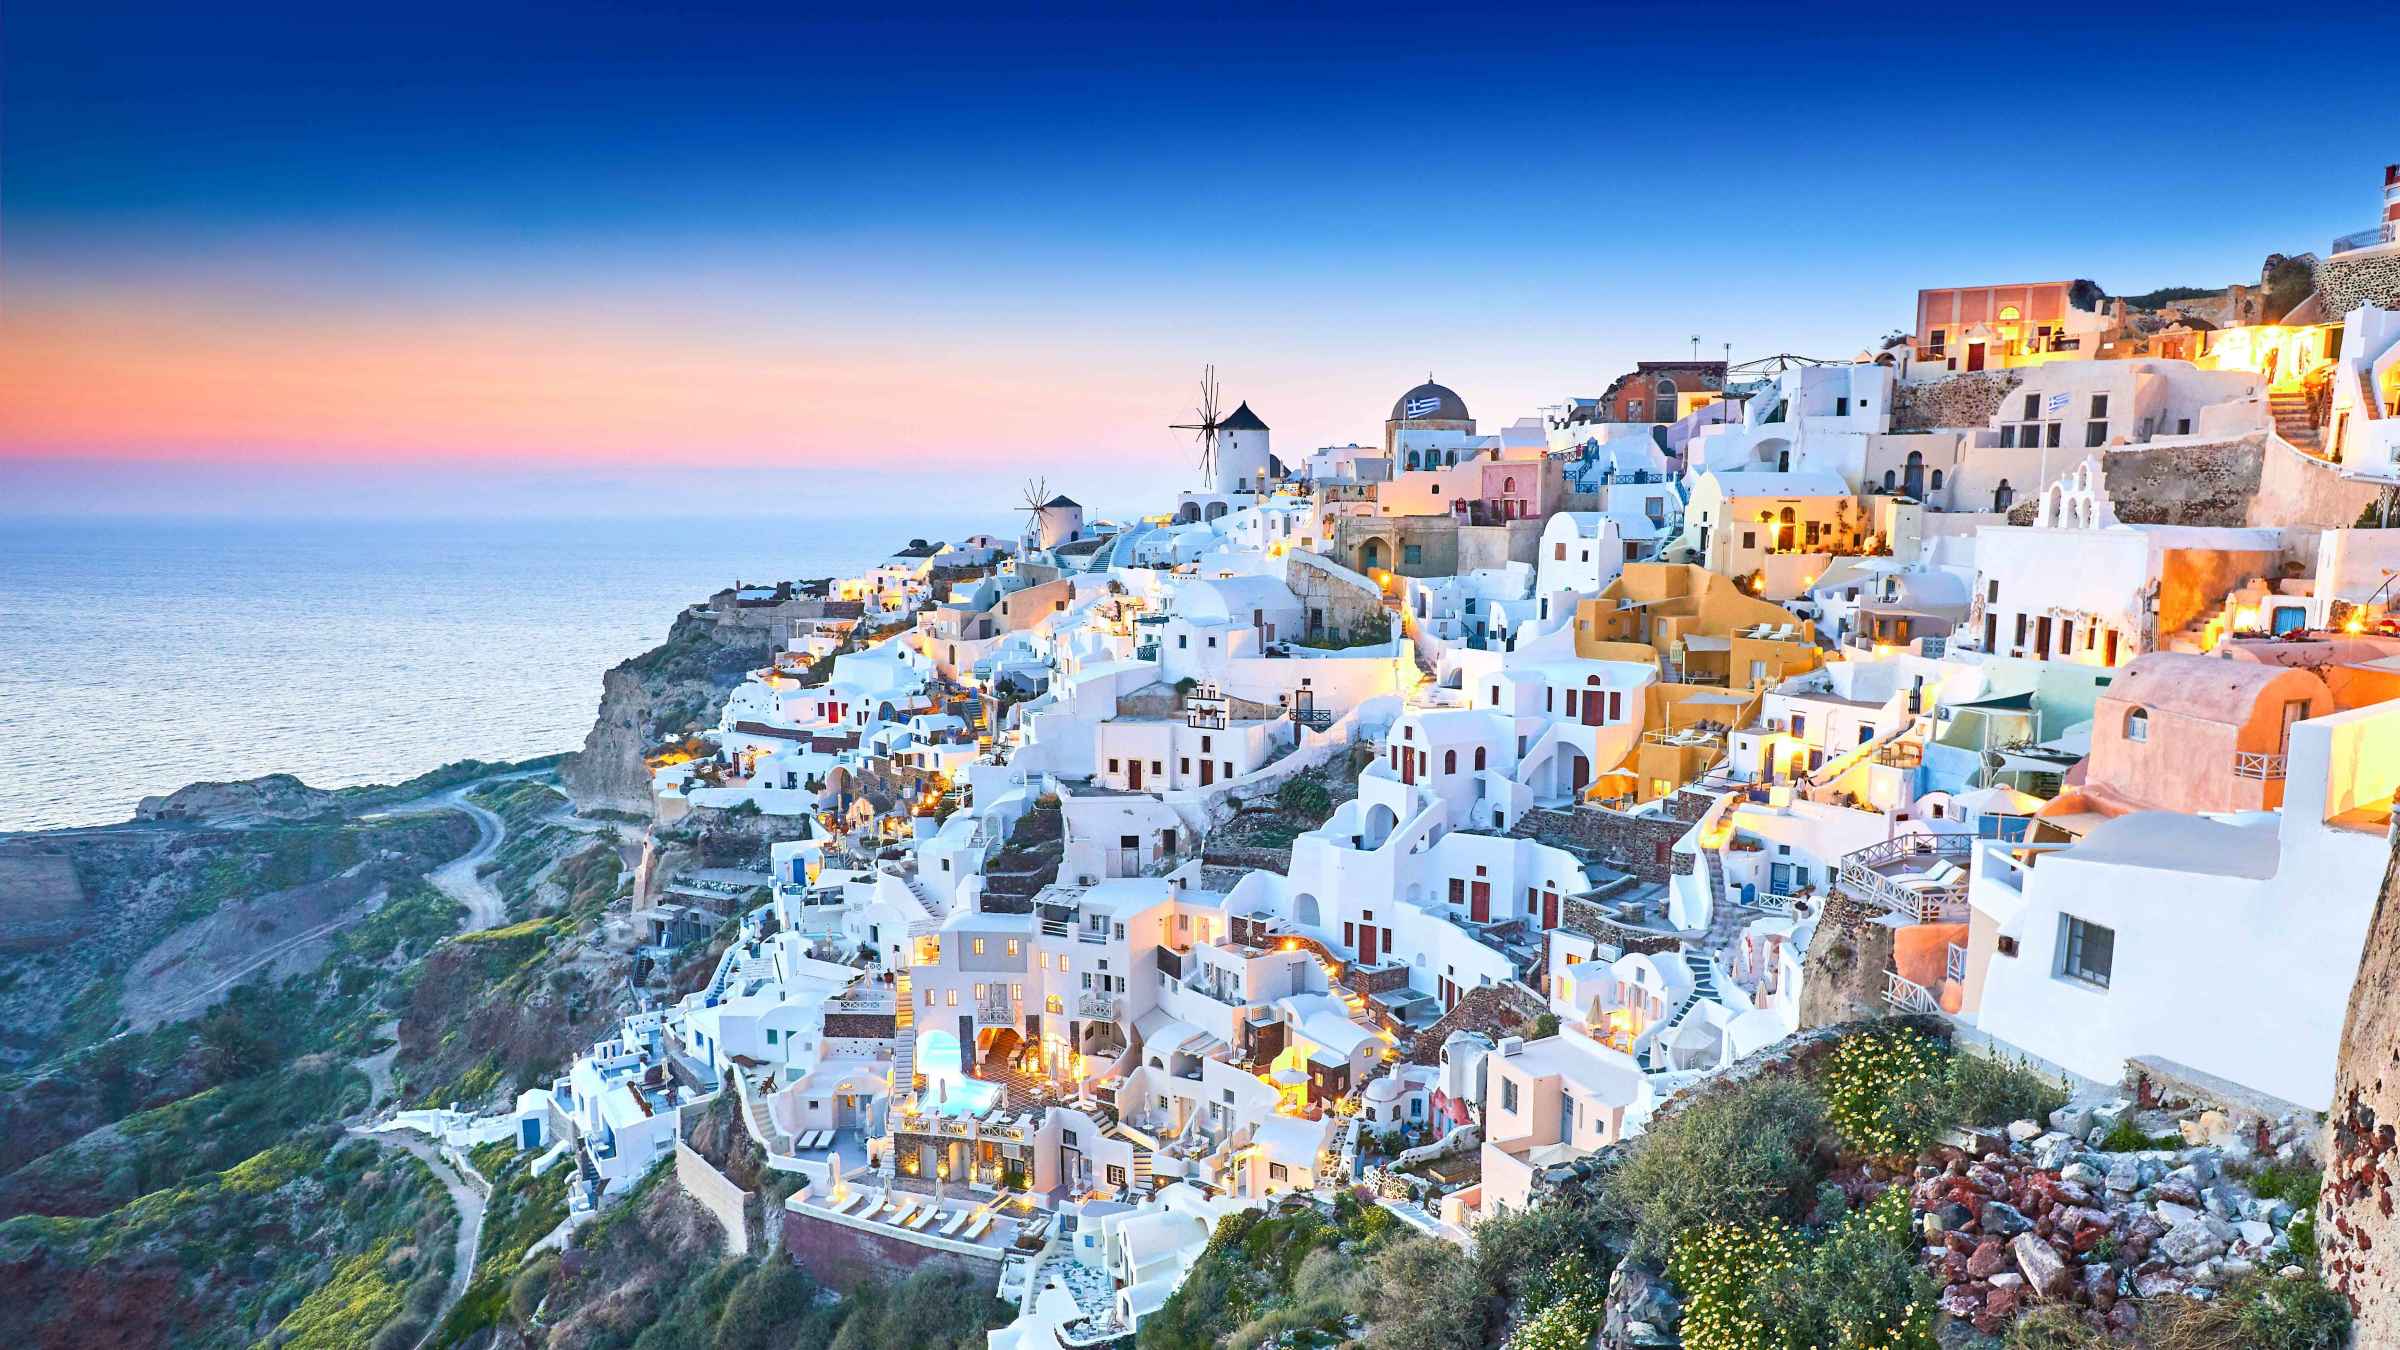 Santorini 2021: Top 10 Tours & Activities (with Photos) - Things to Do